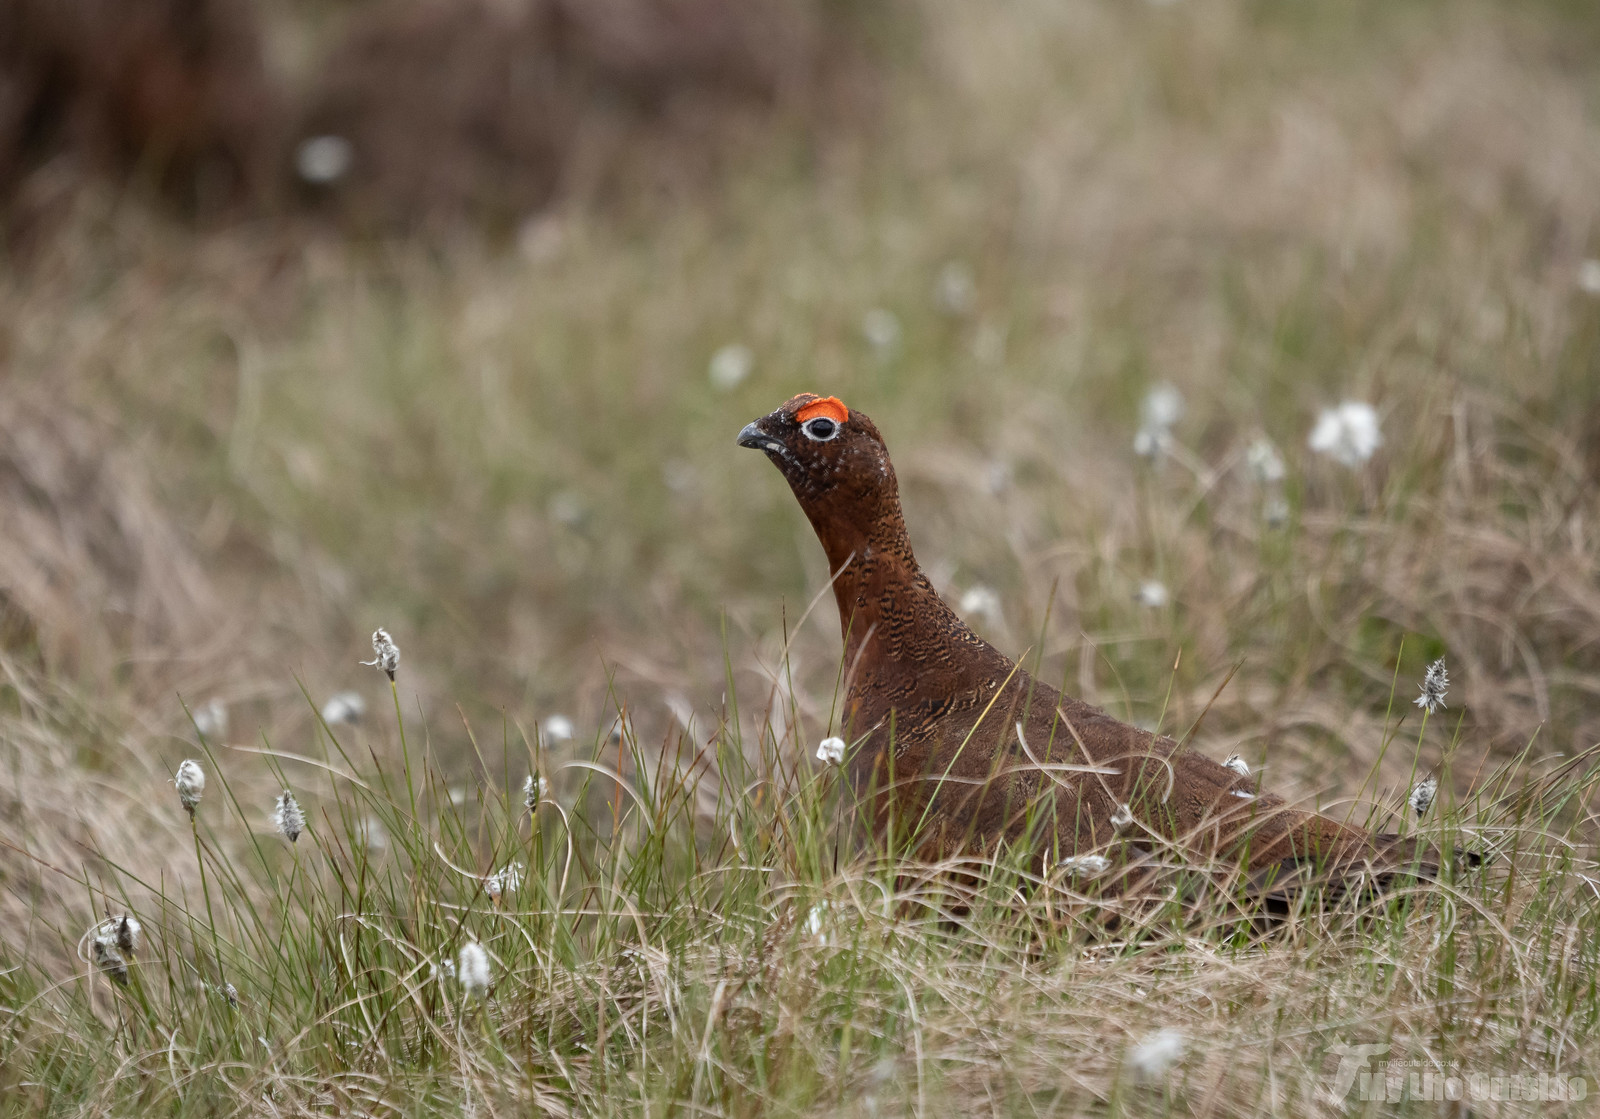 P5212255 - Red Grouse, Ilkley Moor